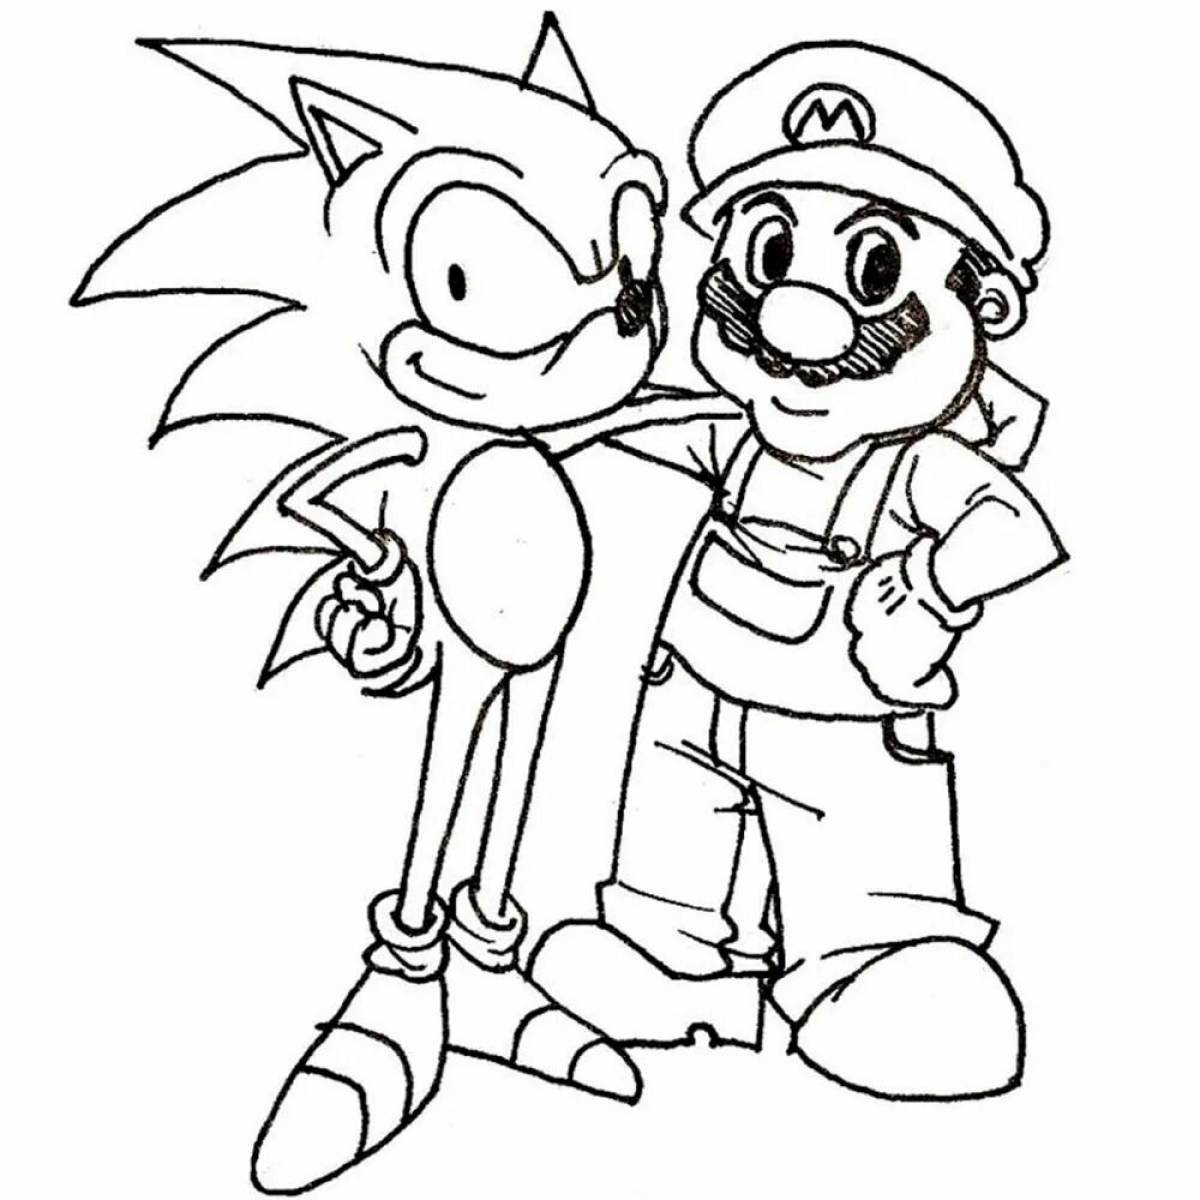 Mario and sonic creative coloring book